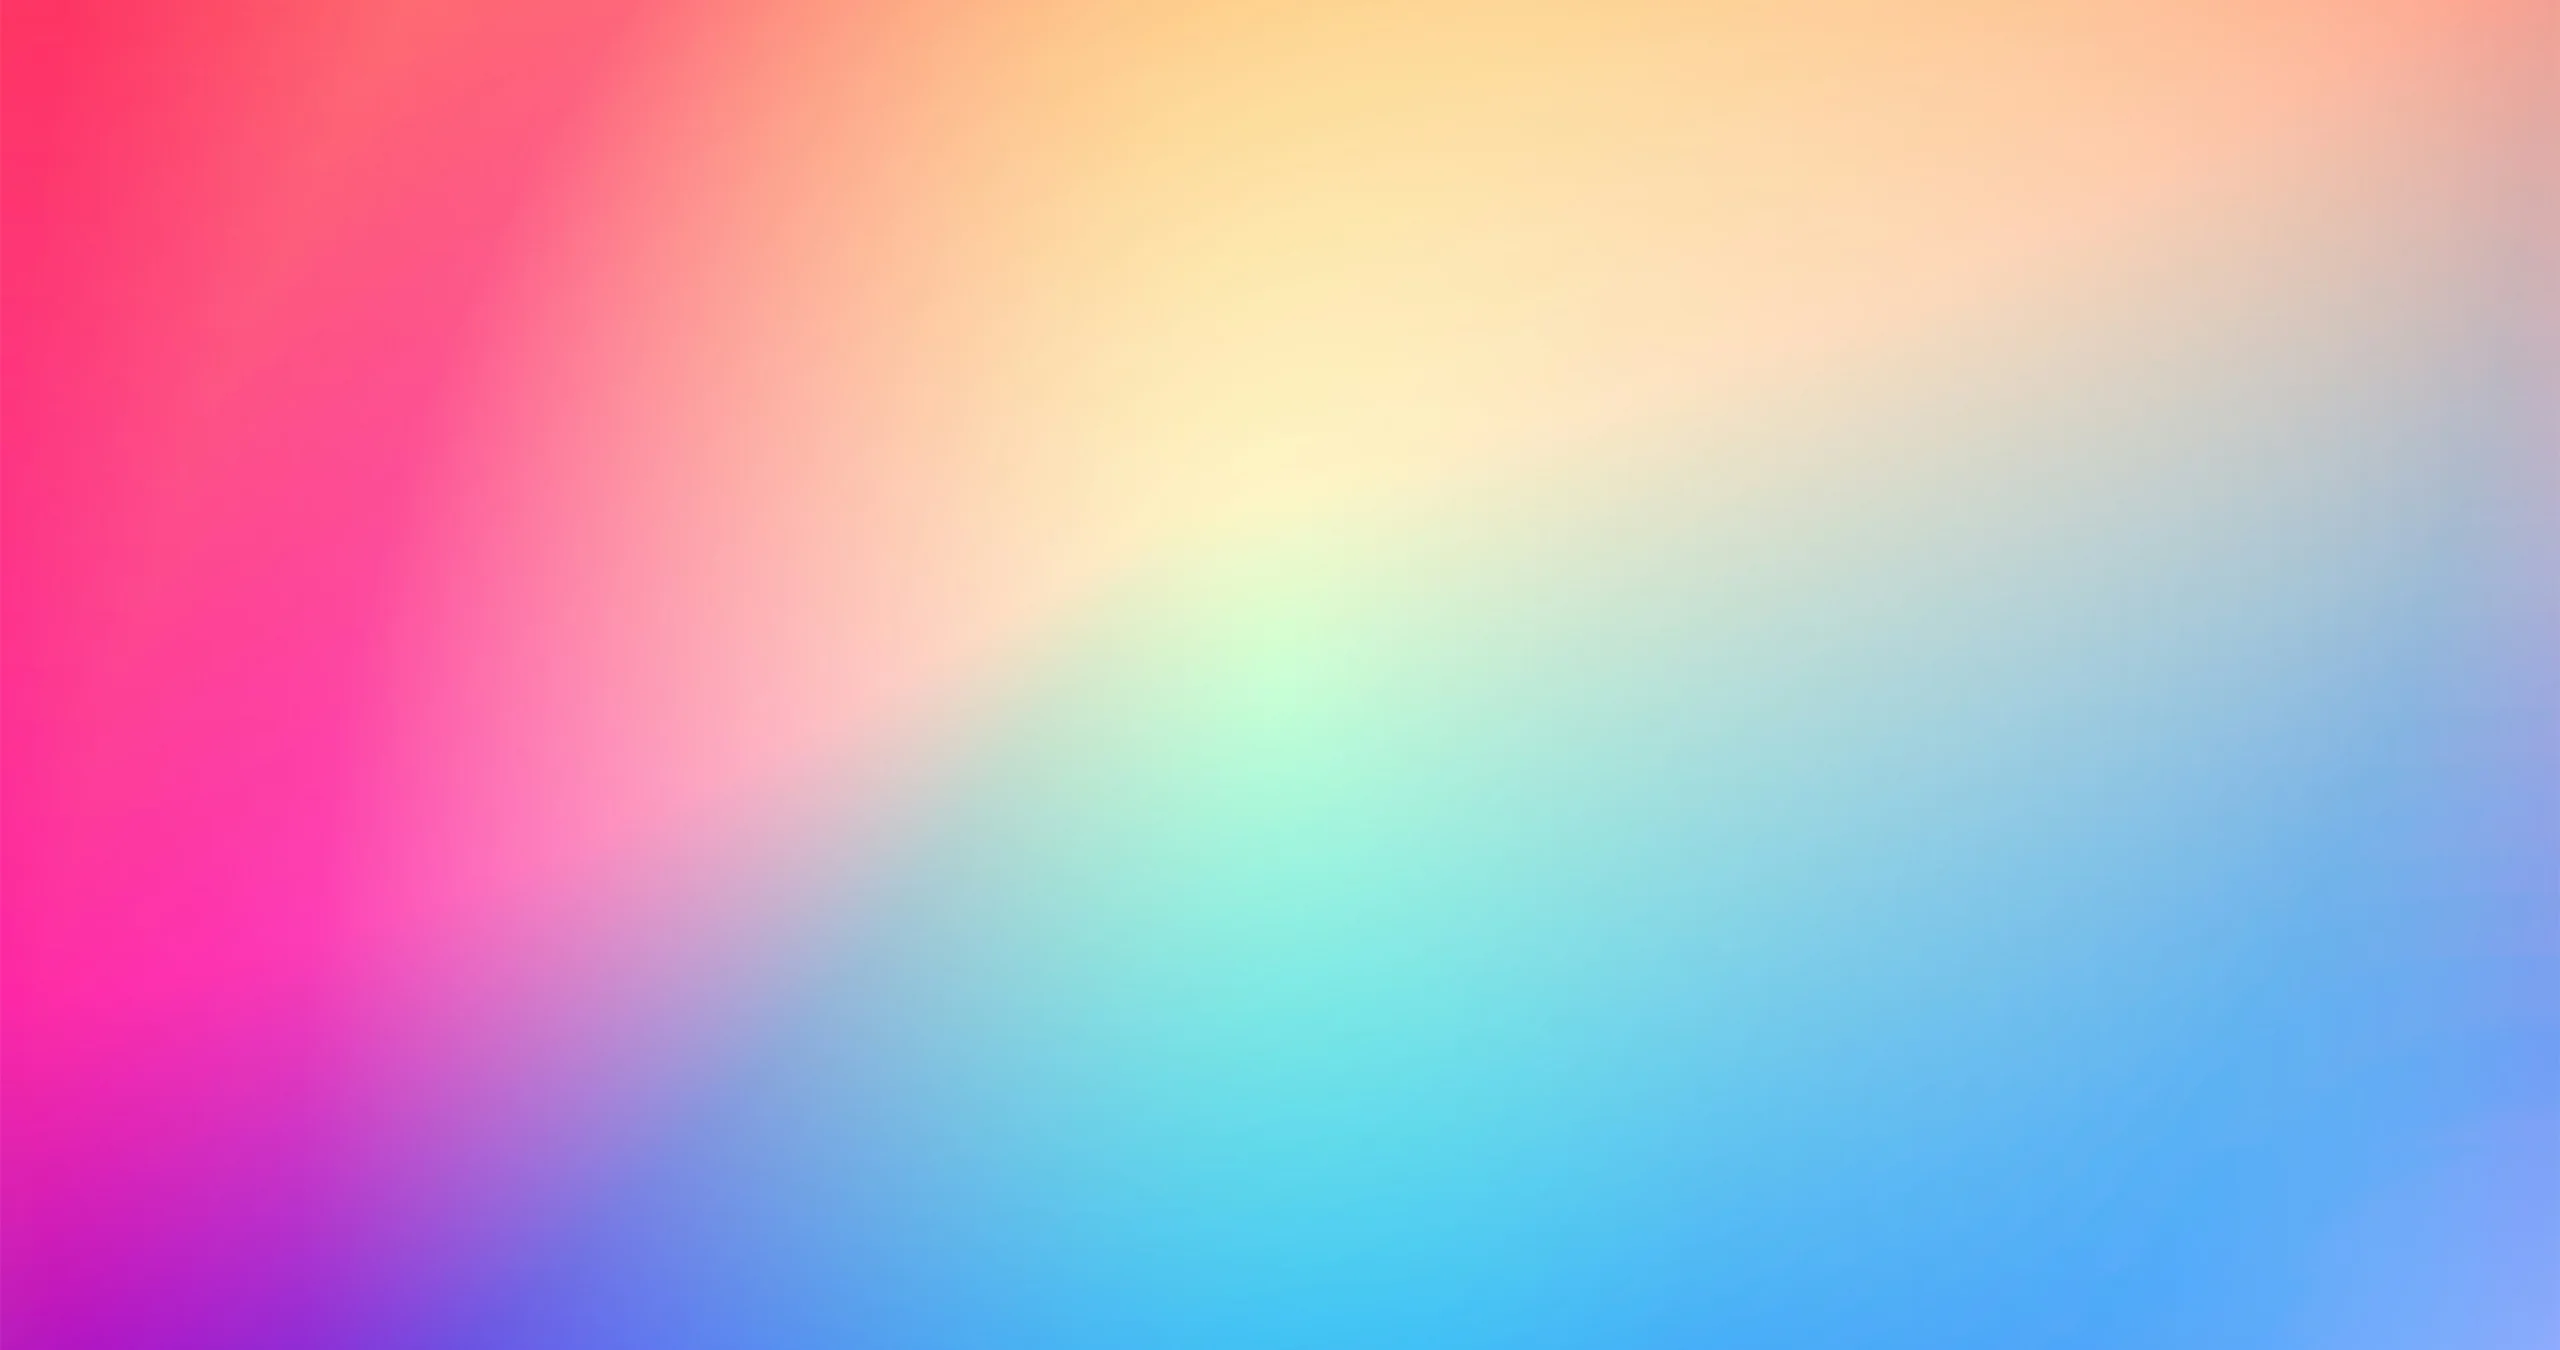 Abstract Gradients - A Kaleidoscope of Colors